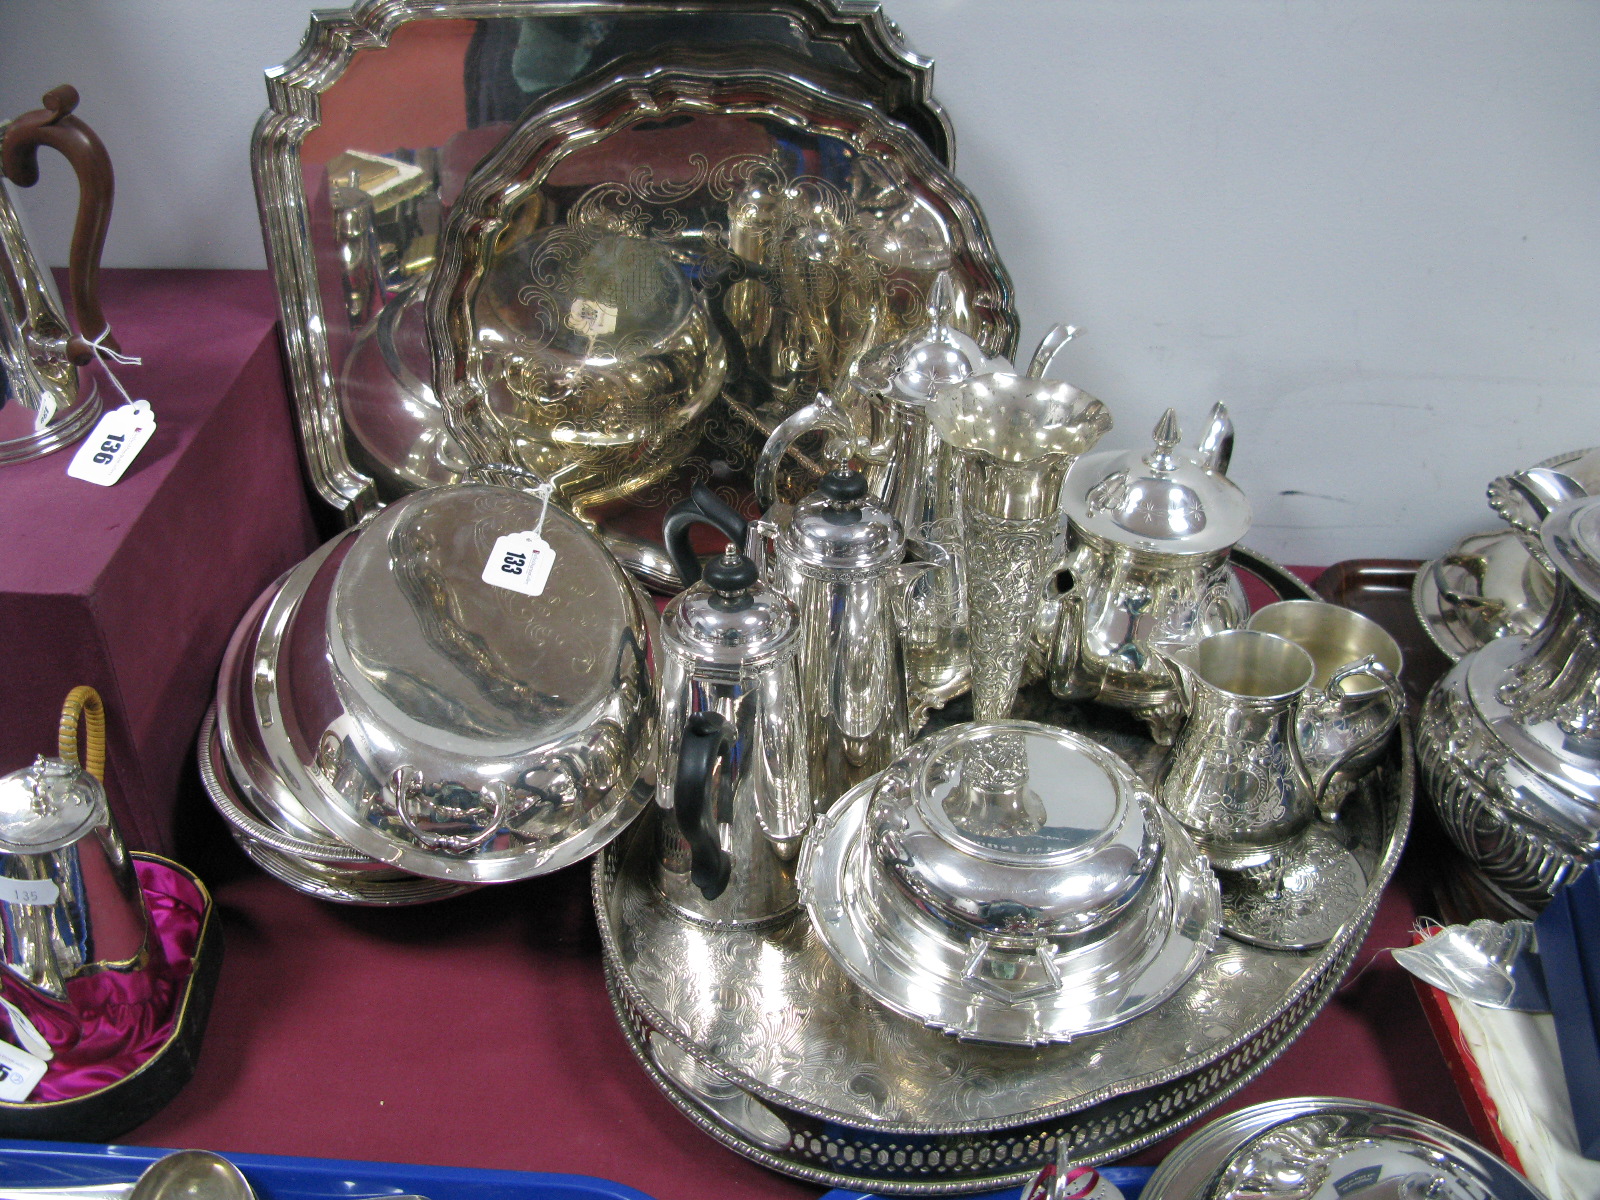 Assorted Plated Ware, including trays, teaset, vase, muffin dish, cafe au lait set, entree dishes